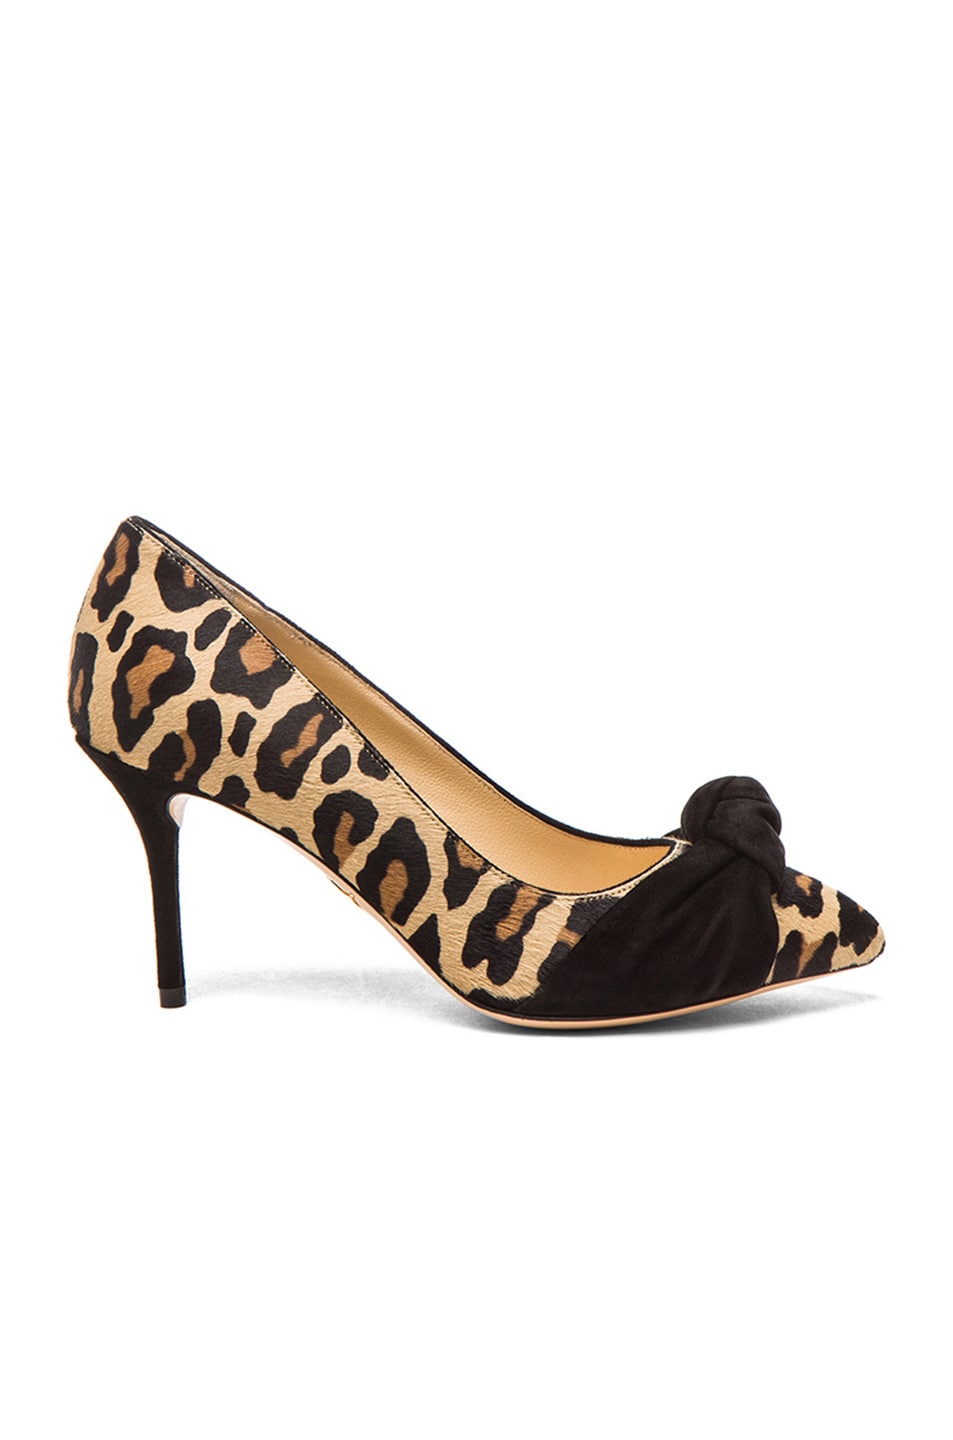 Image 1 of Charlotte Olympia Vera Calf Hair Pumps in Leopard & Black